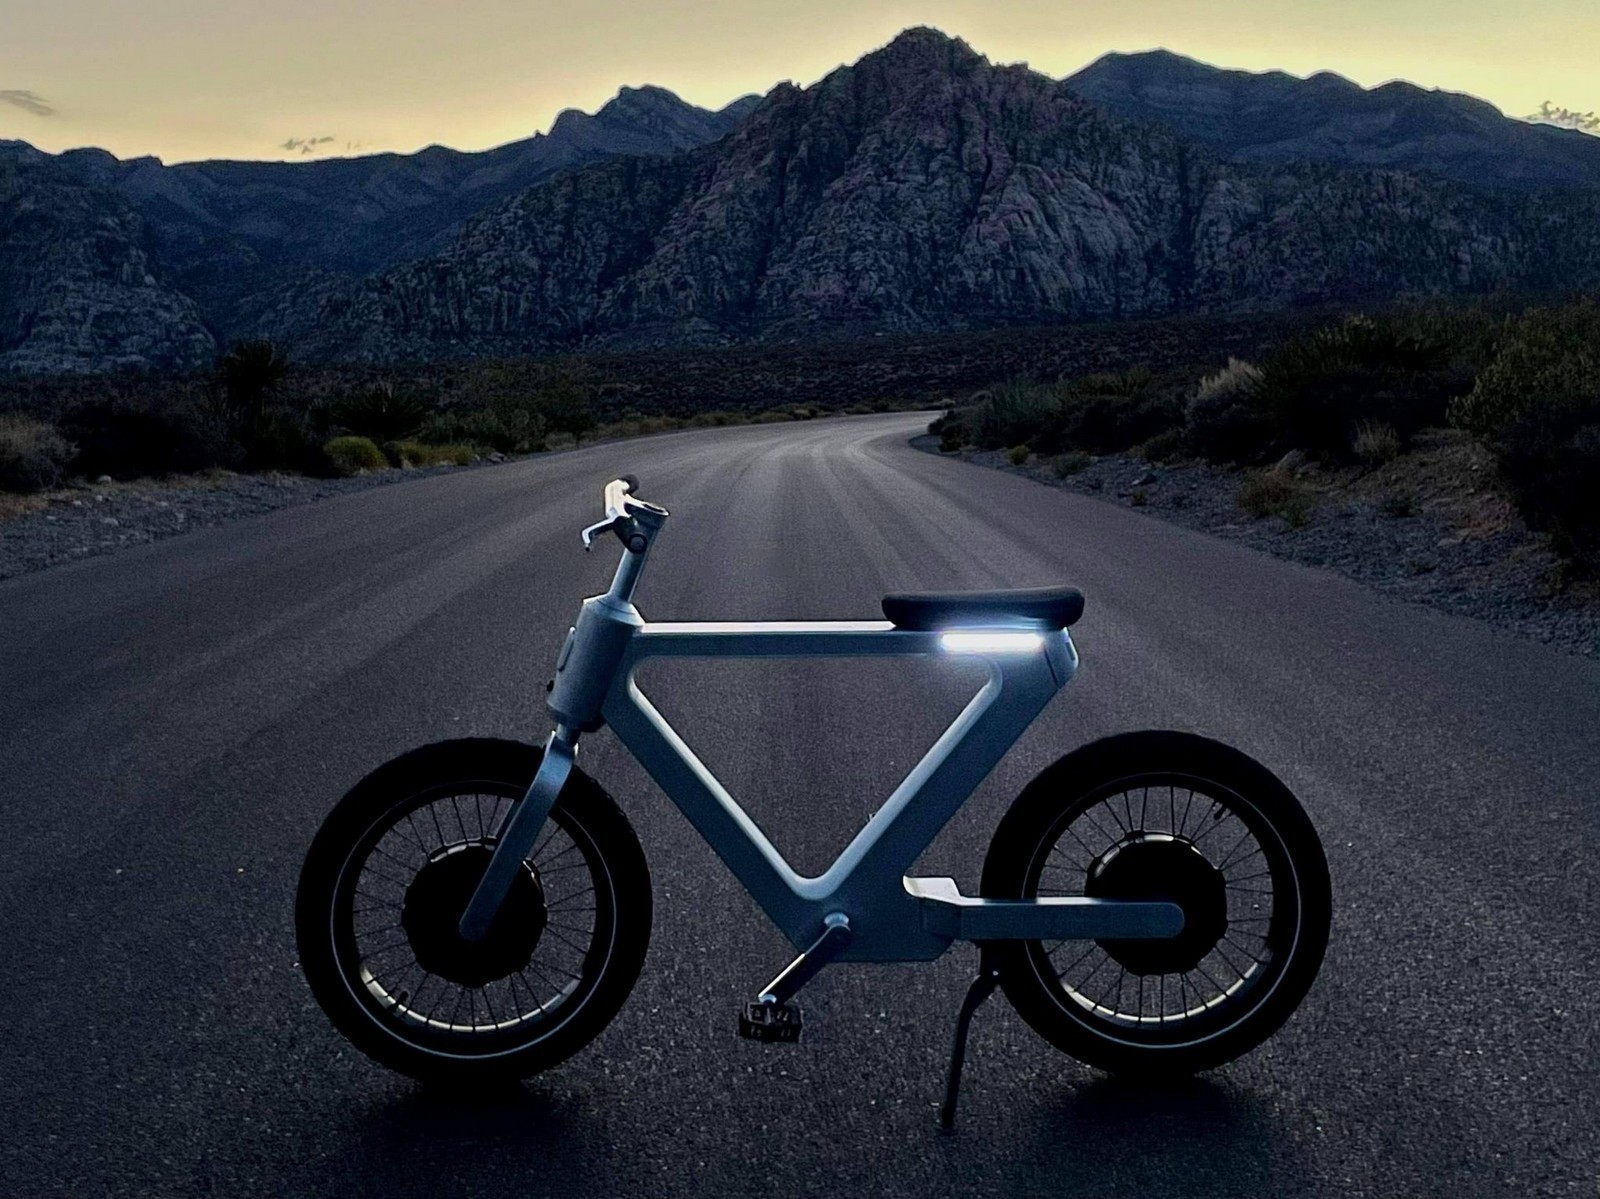 cybertruck-inspired-bike-is-ai-optimized-rides-itself-and-is-fully-controlled-by-software_6.jpg